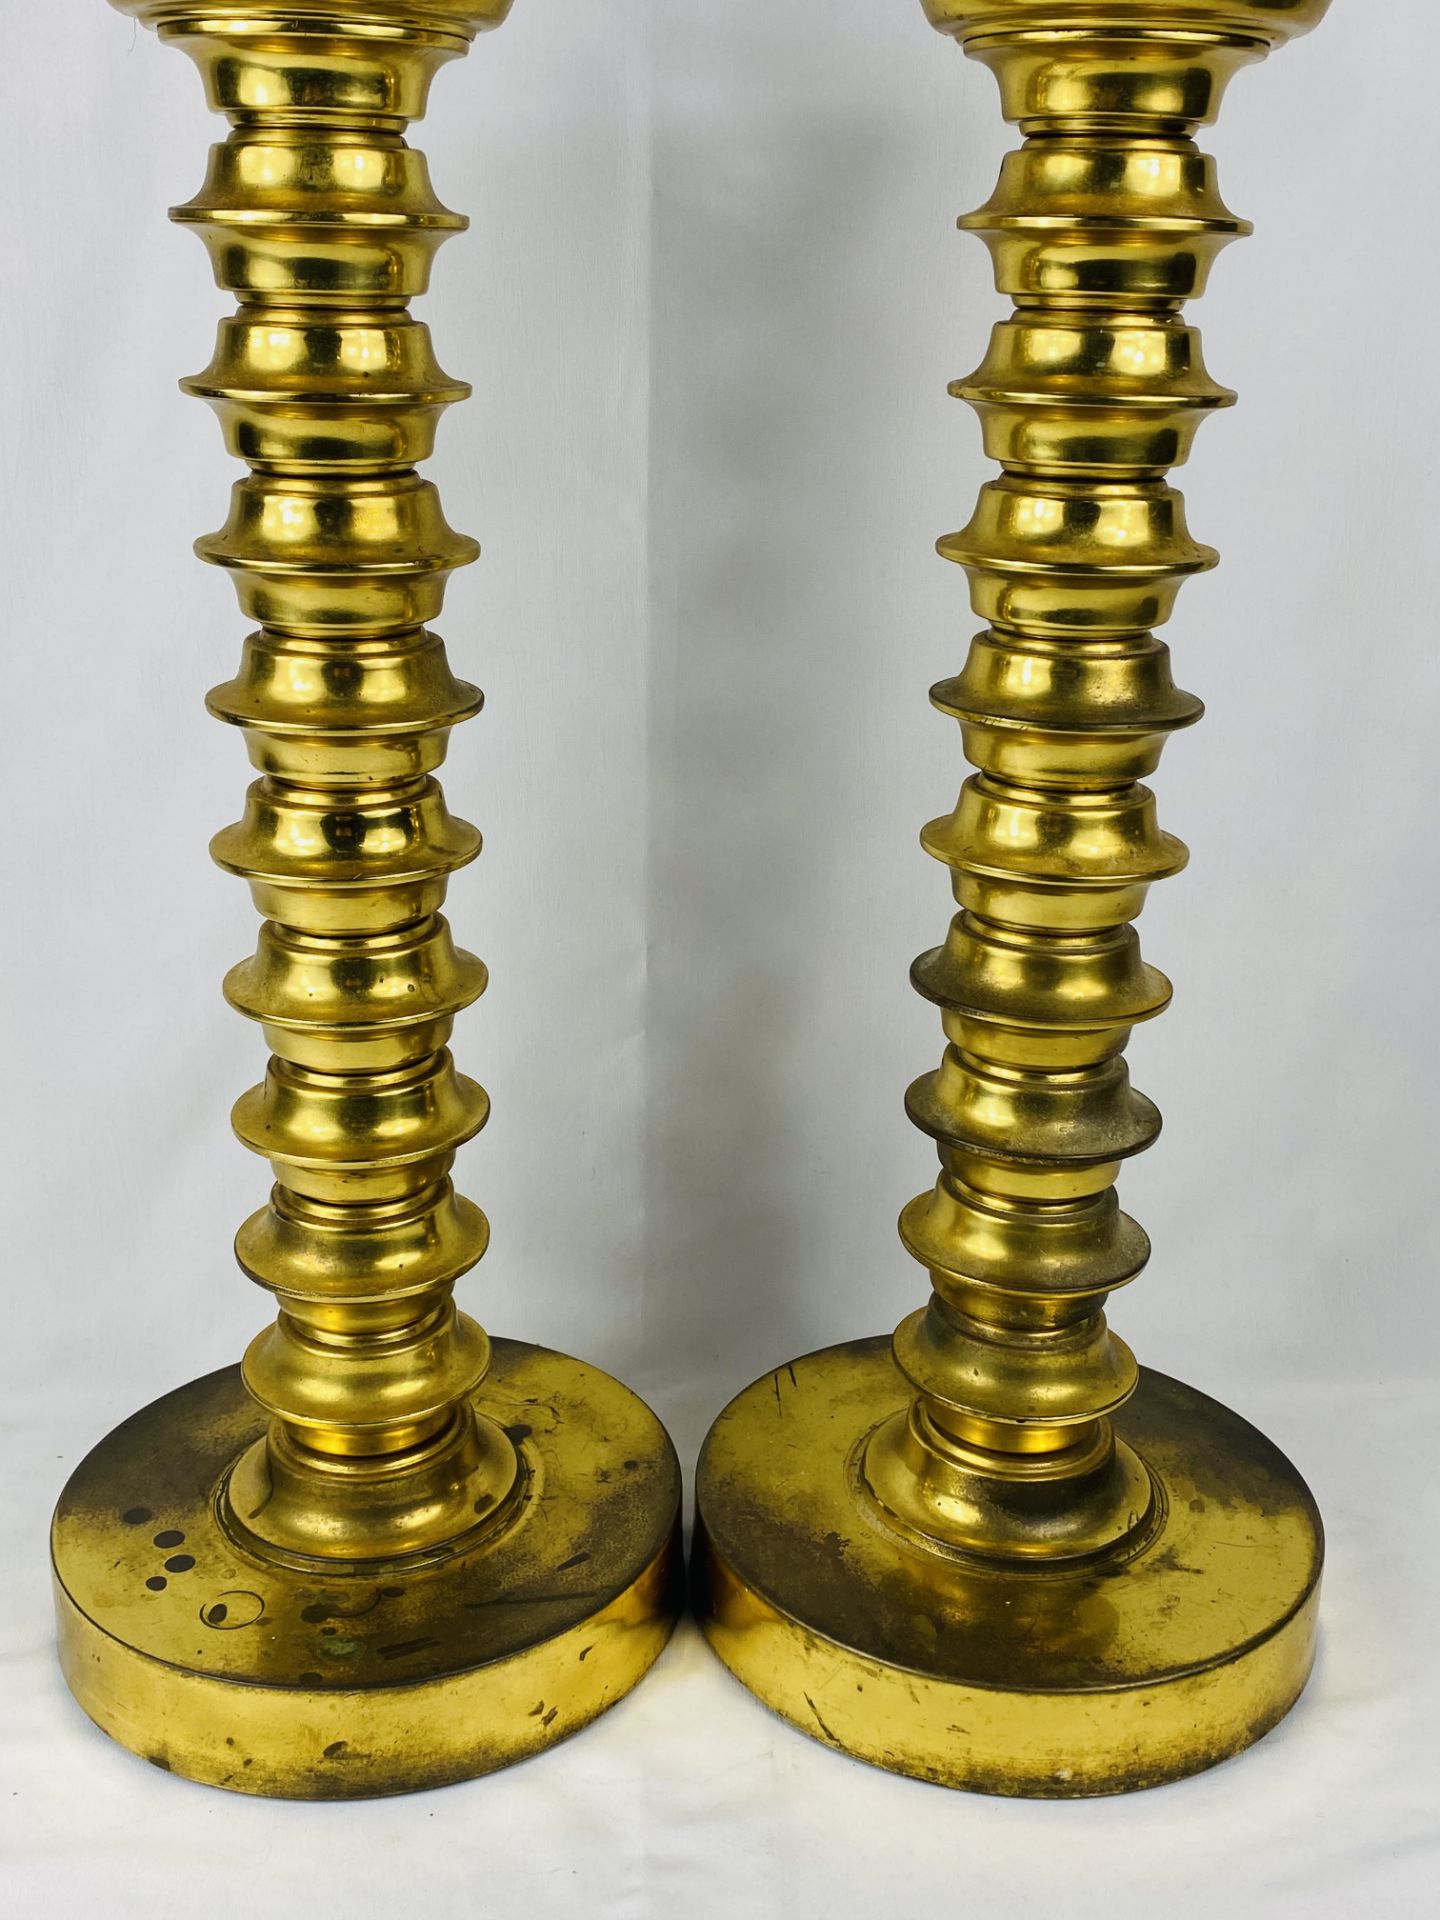 Pair of brass table lamps - Image 4 of 4